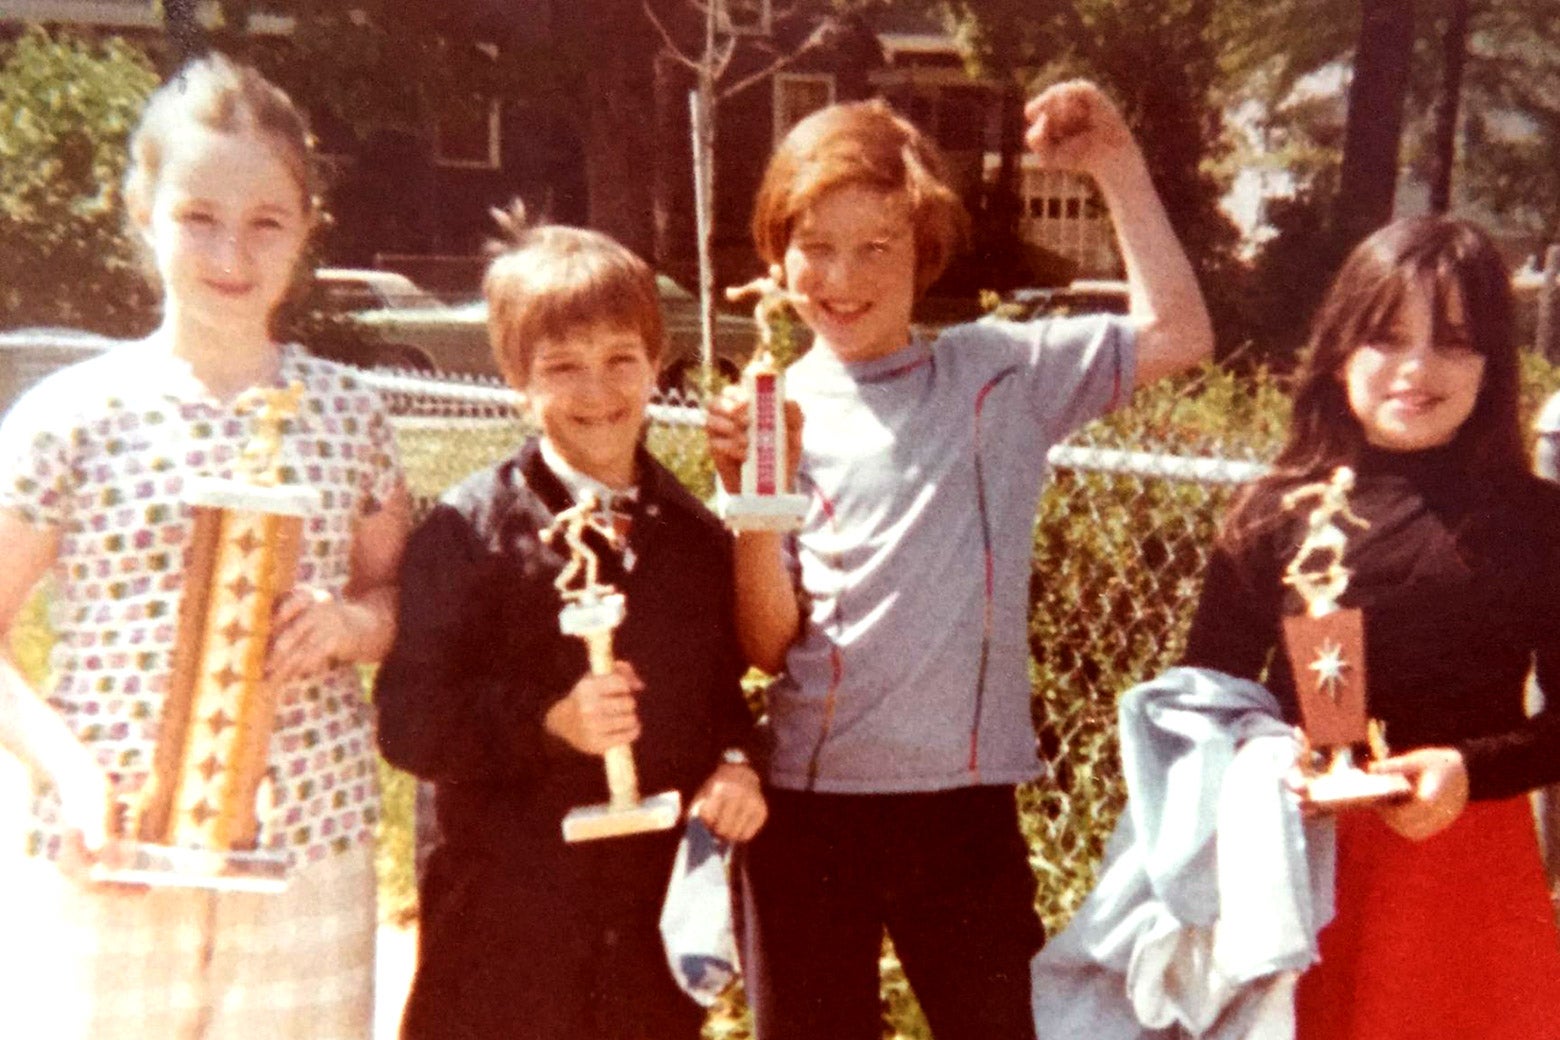 The author, far right, holding a candlepin bowling trophy, like everyone else. 